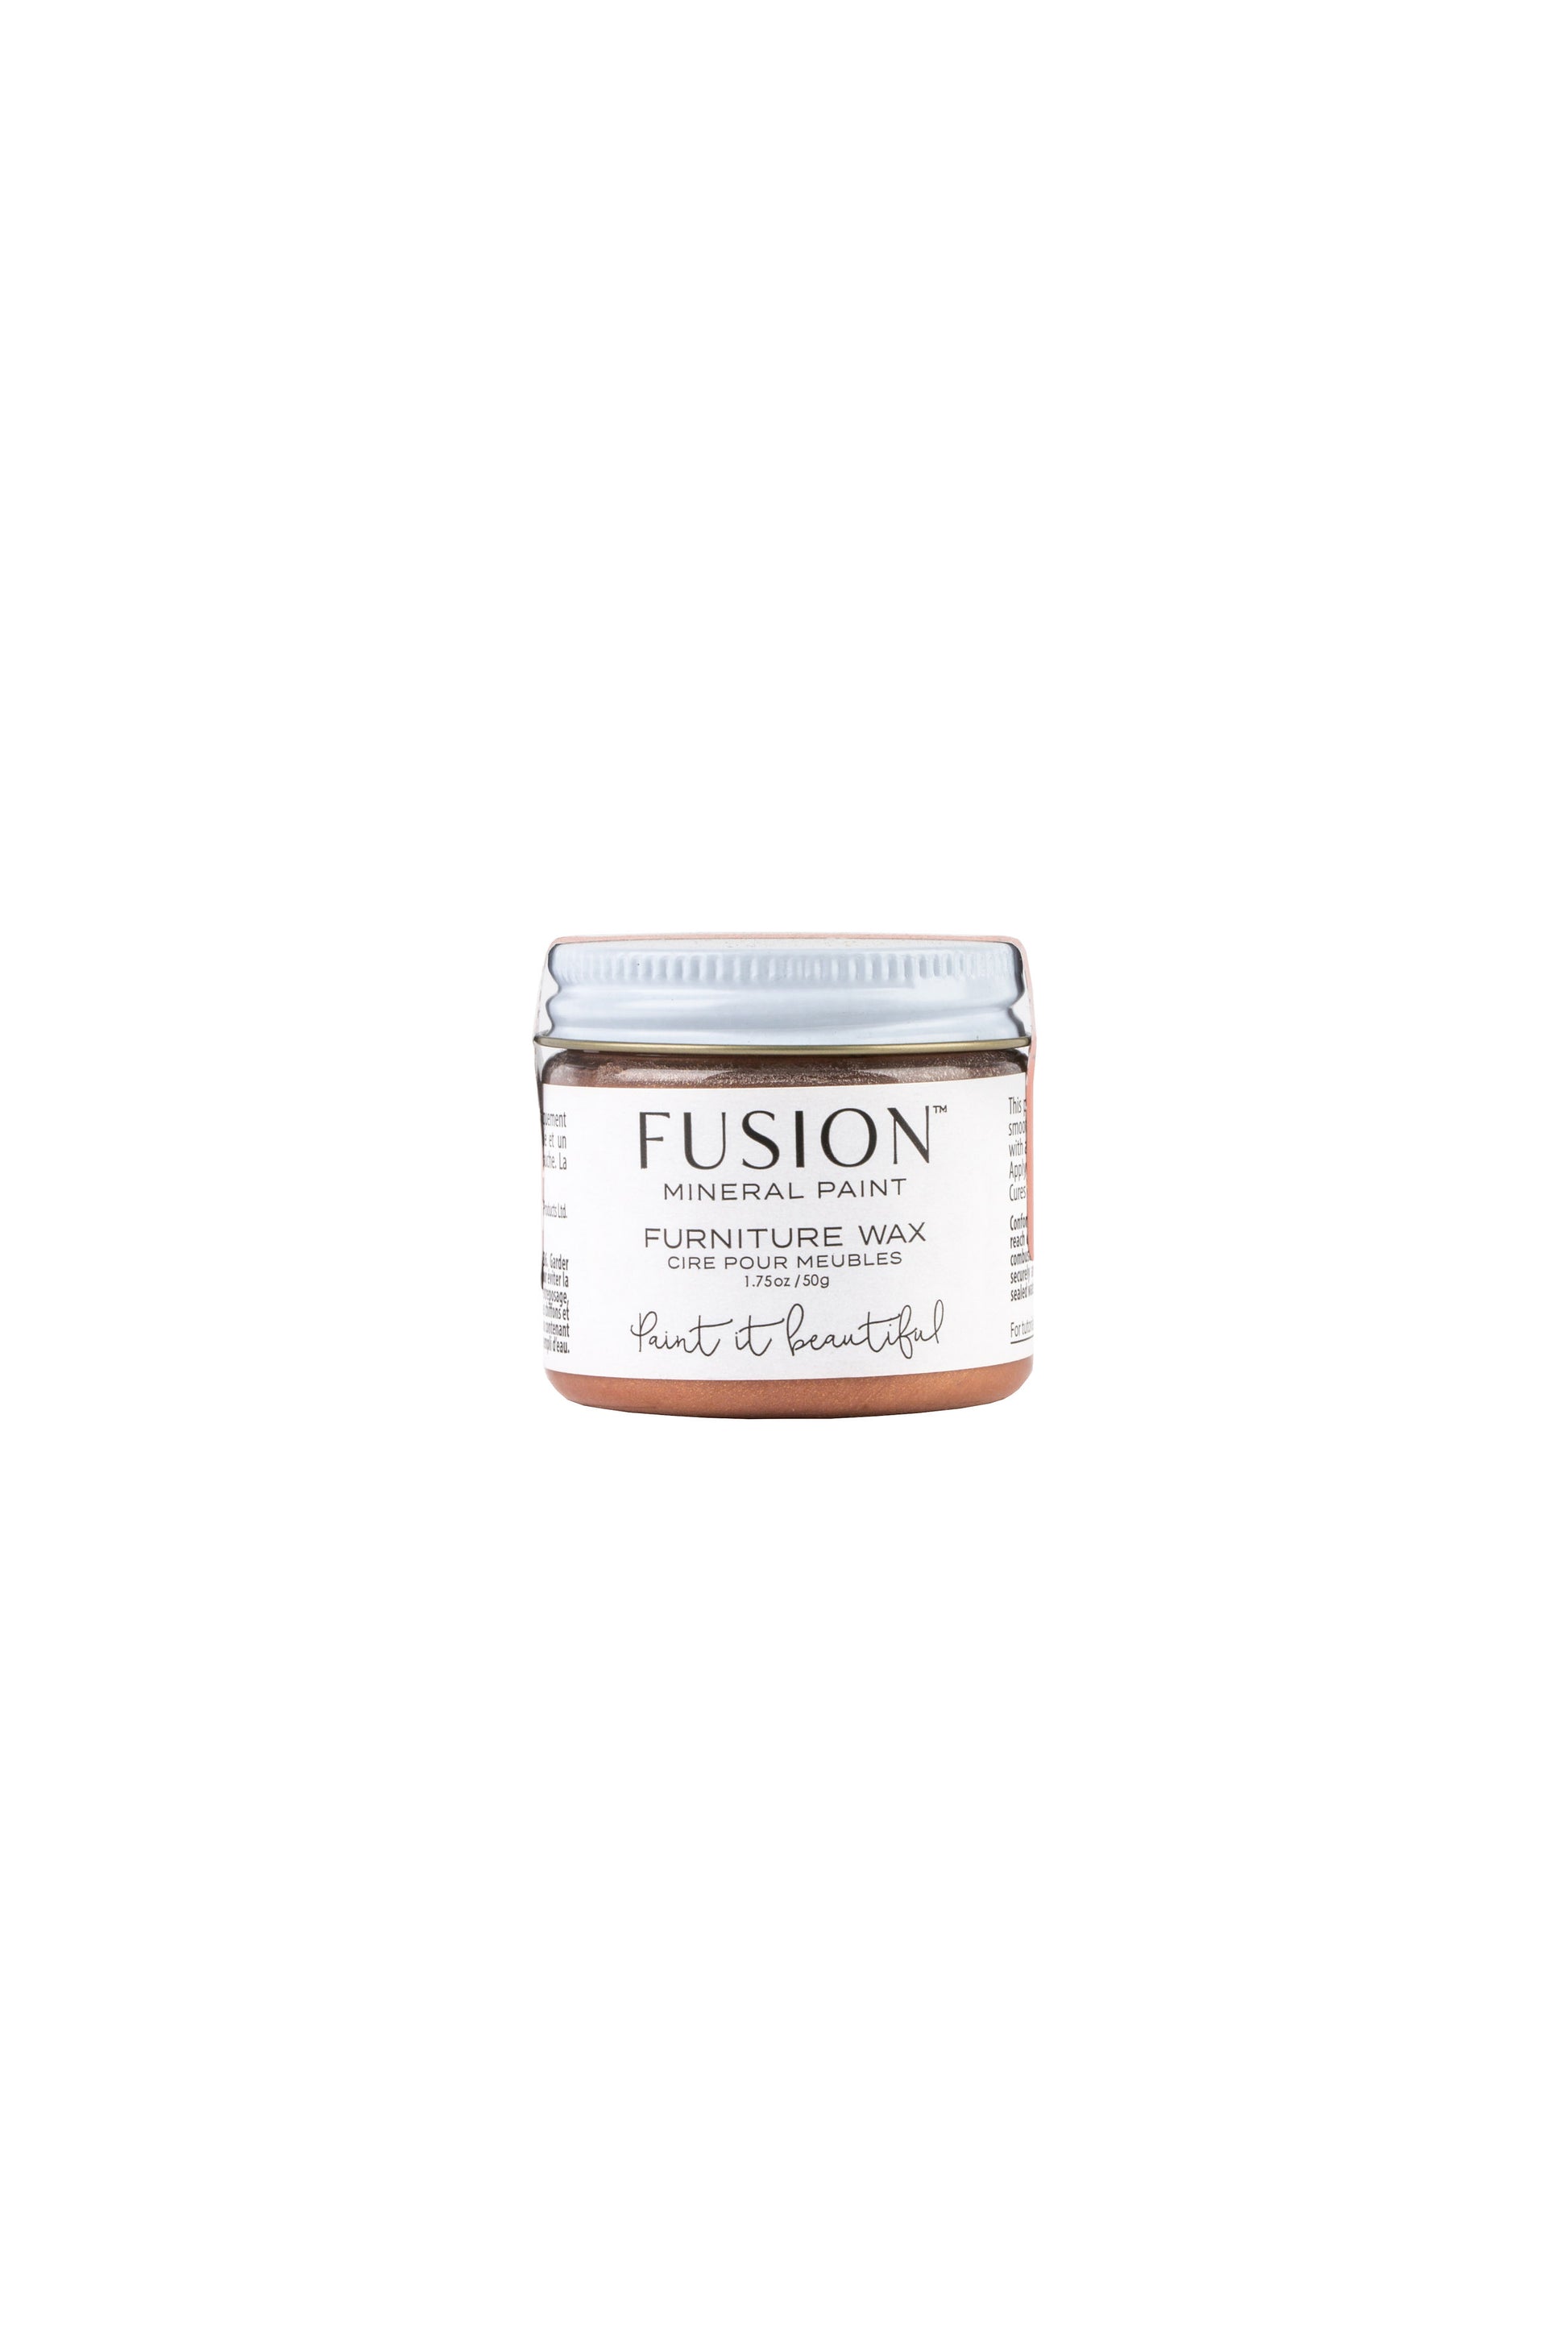 Copper Wax Fusion Mineral Paint | 50g Size